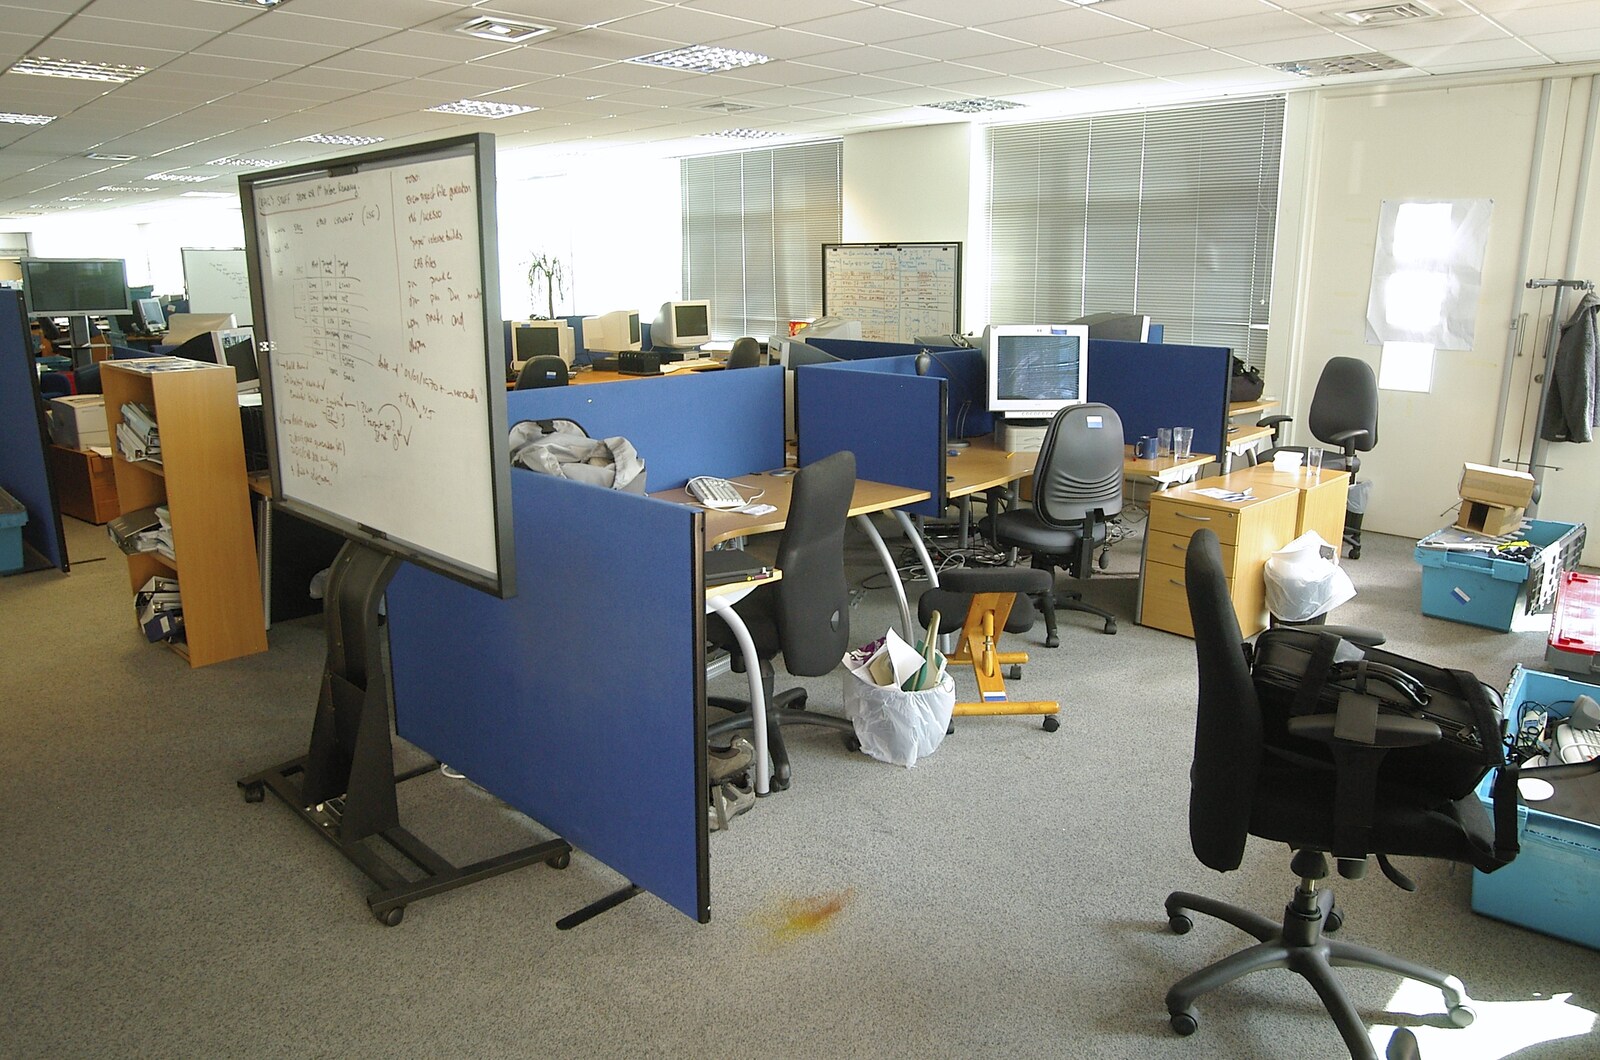 More vacant desks from Qualcomm Moves Offices, Milton Road, Cambridge - 26th July 2006